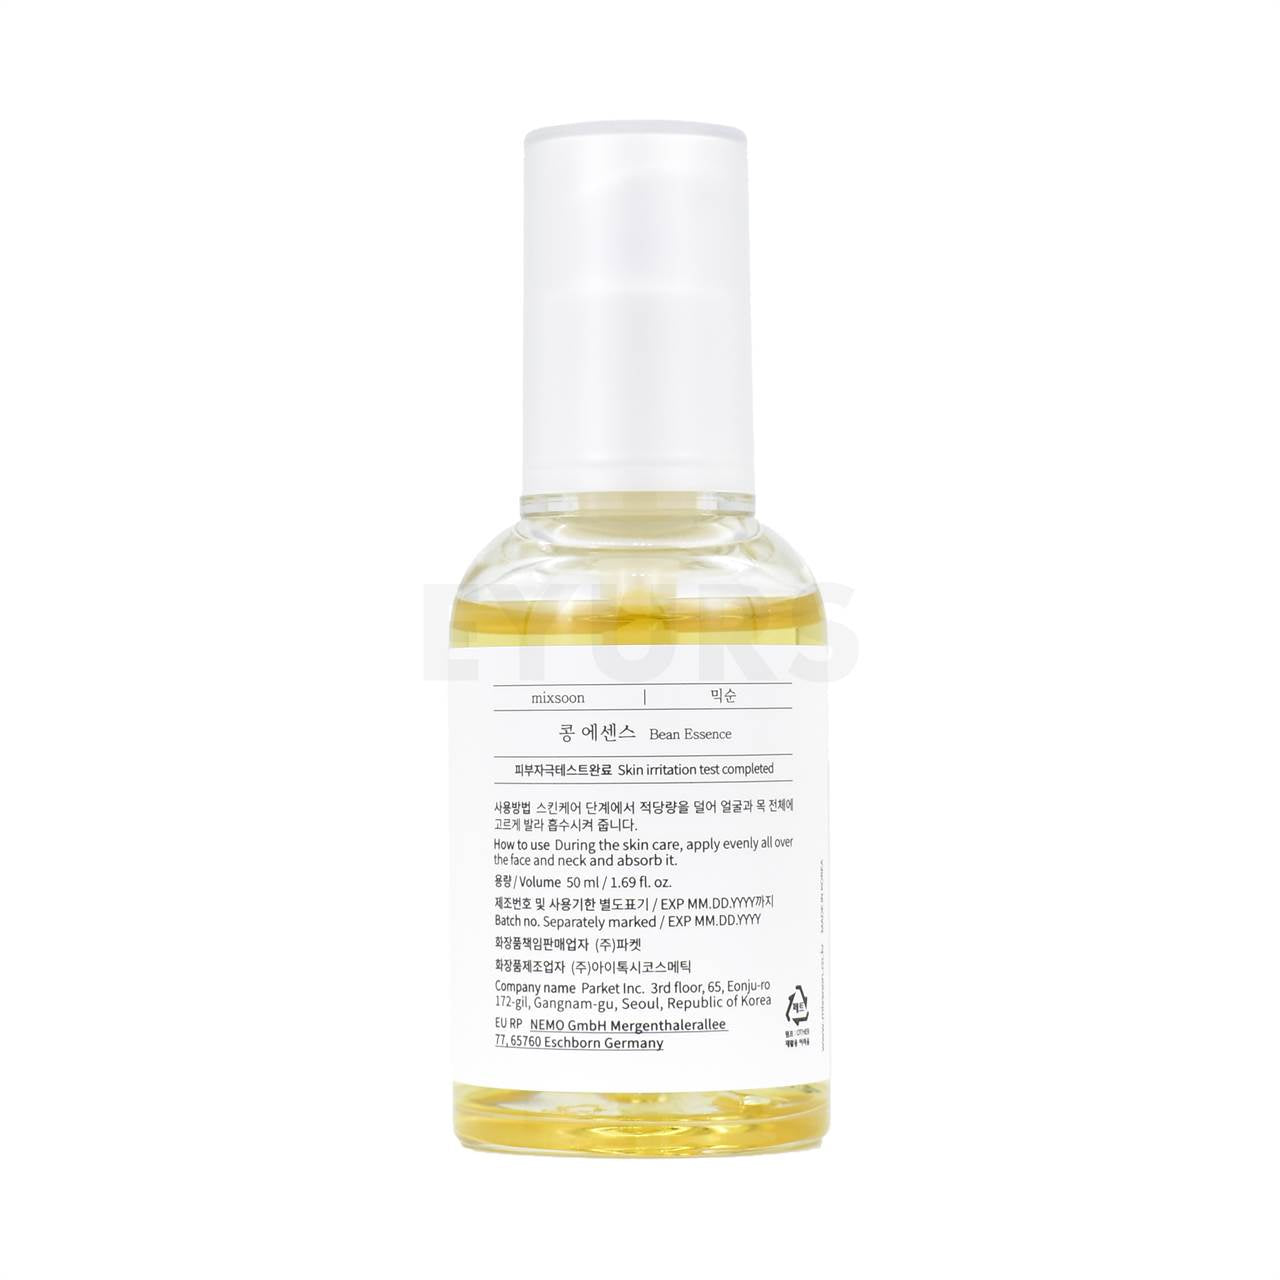 mixsoon bean essence 50ml back of product